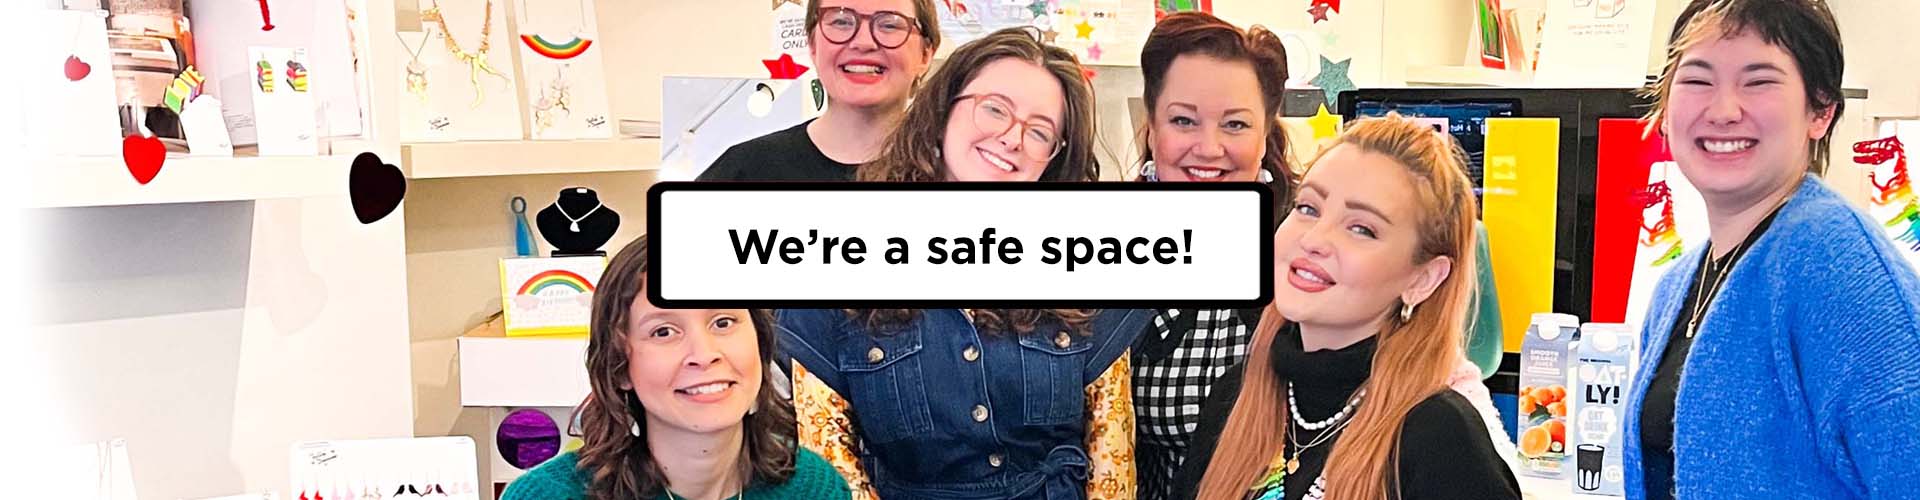 We're a safe space!